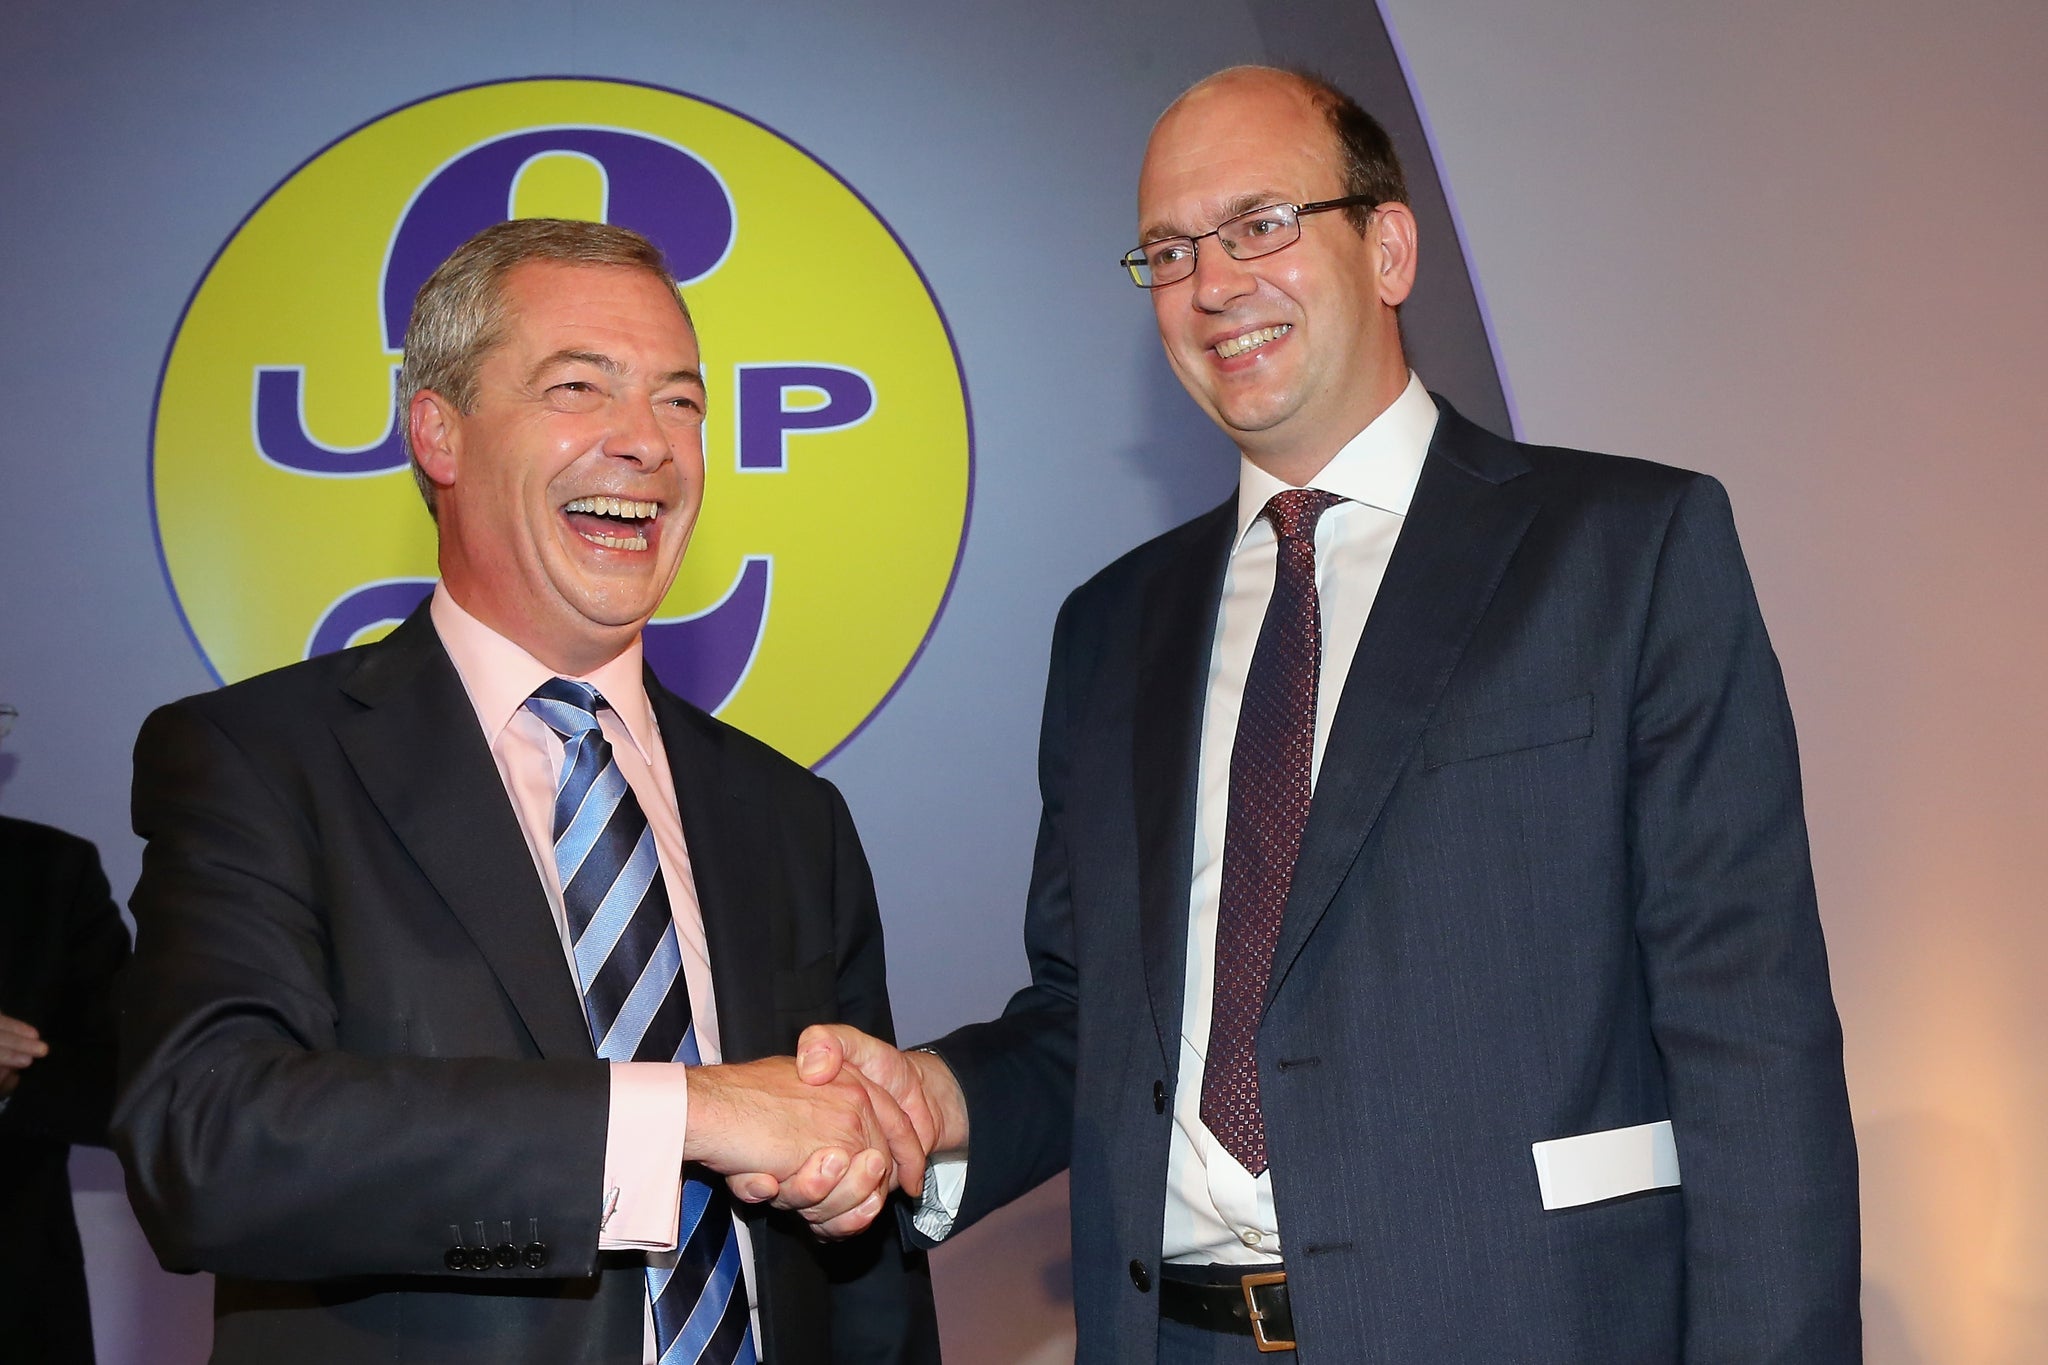 Mark Reckless, a Tory MP, has announced he is defecting to Ukip